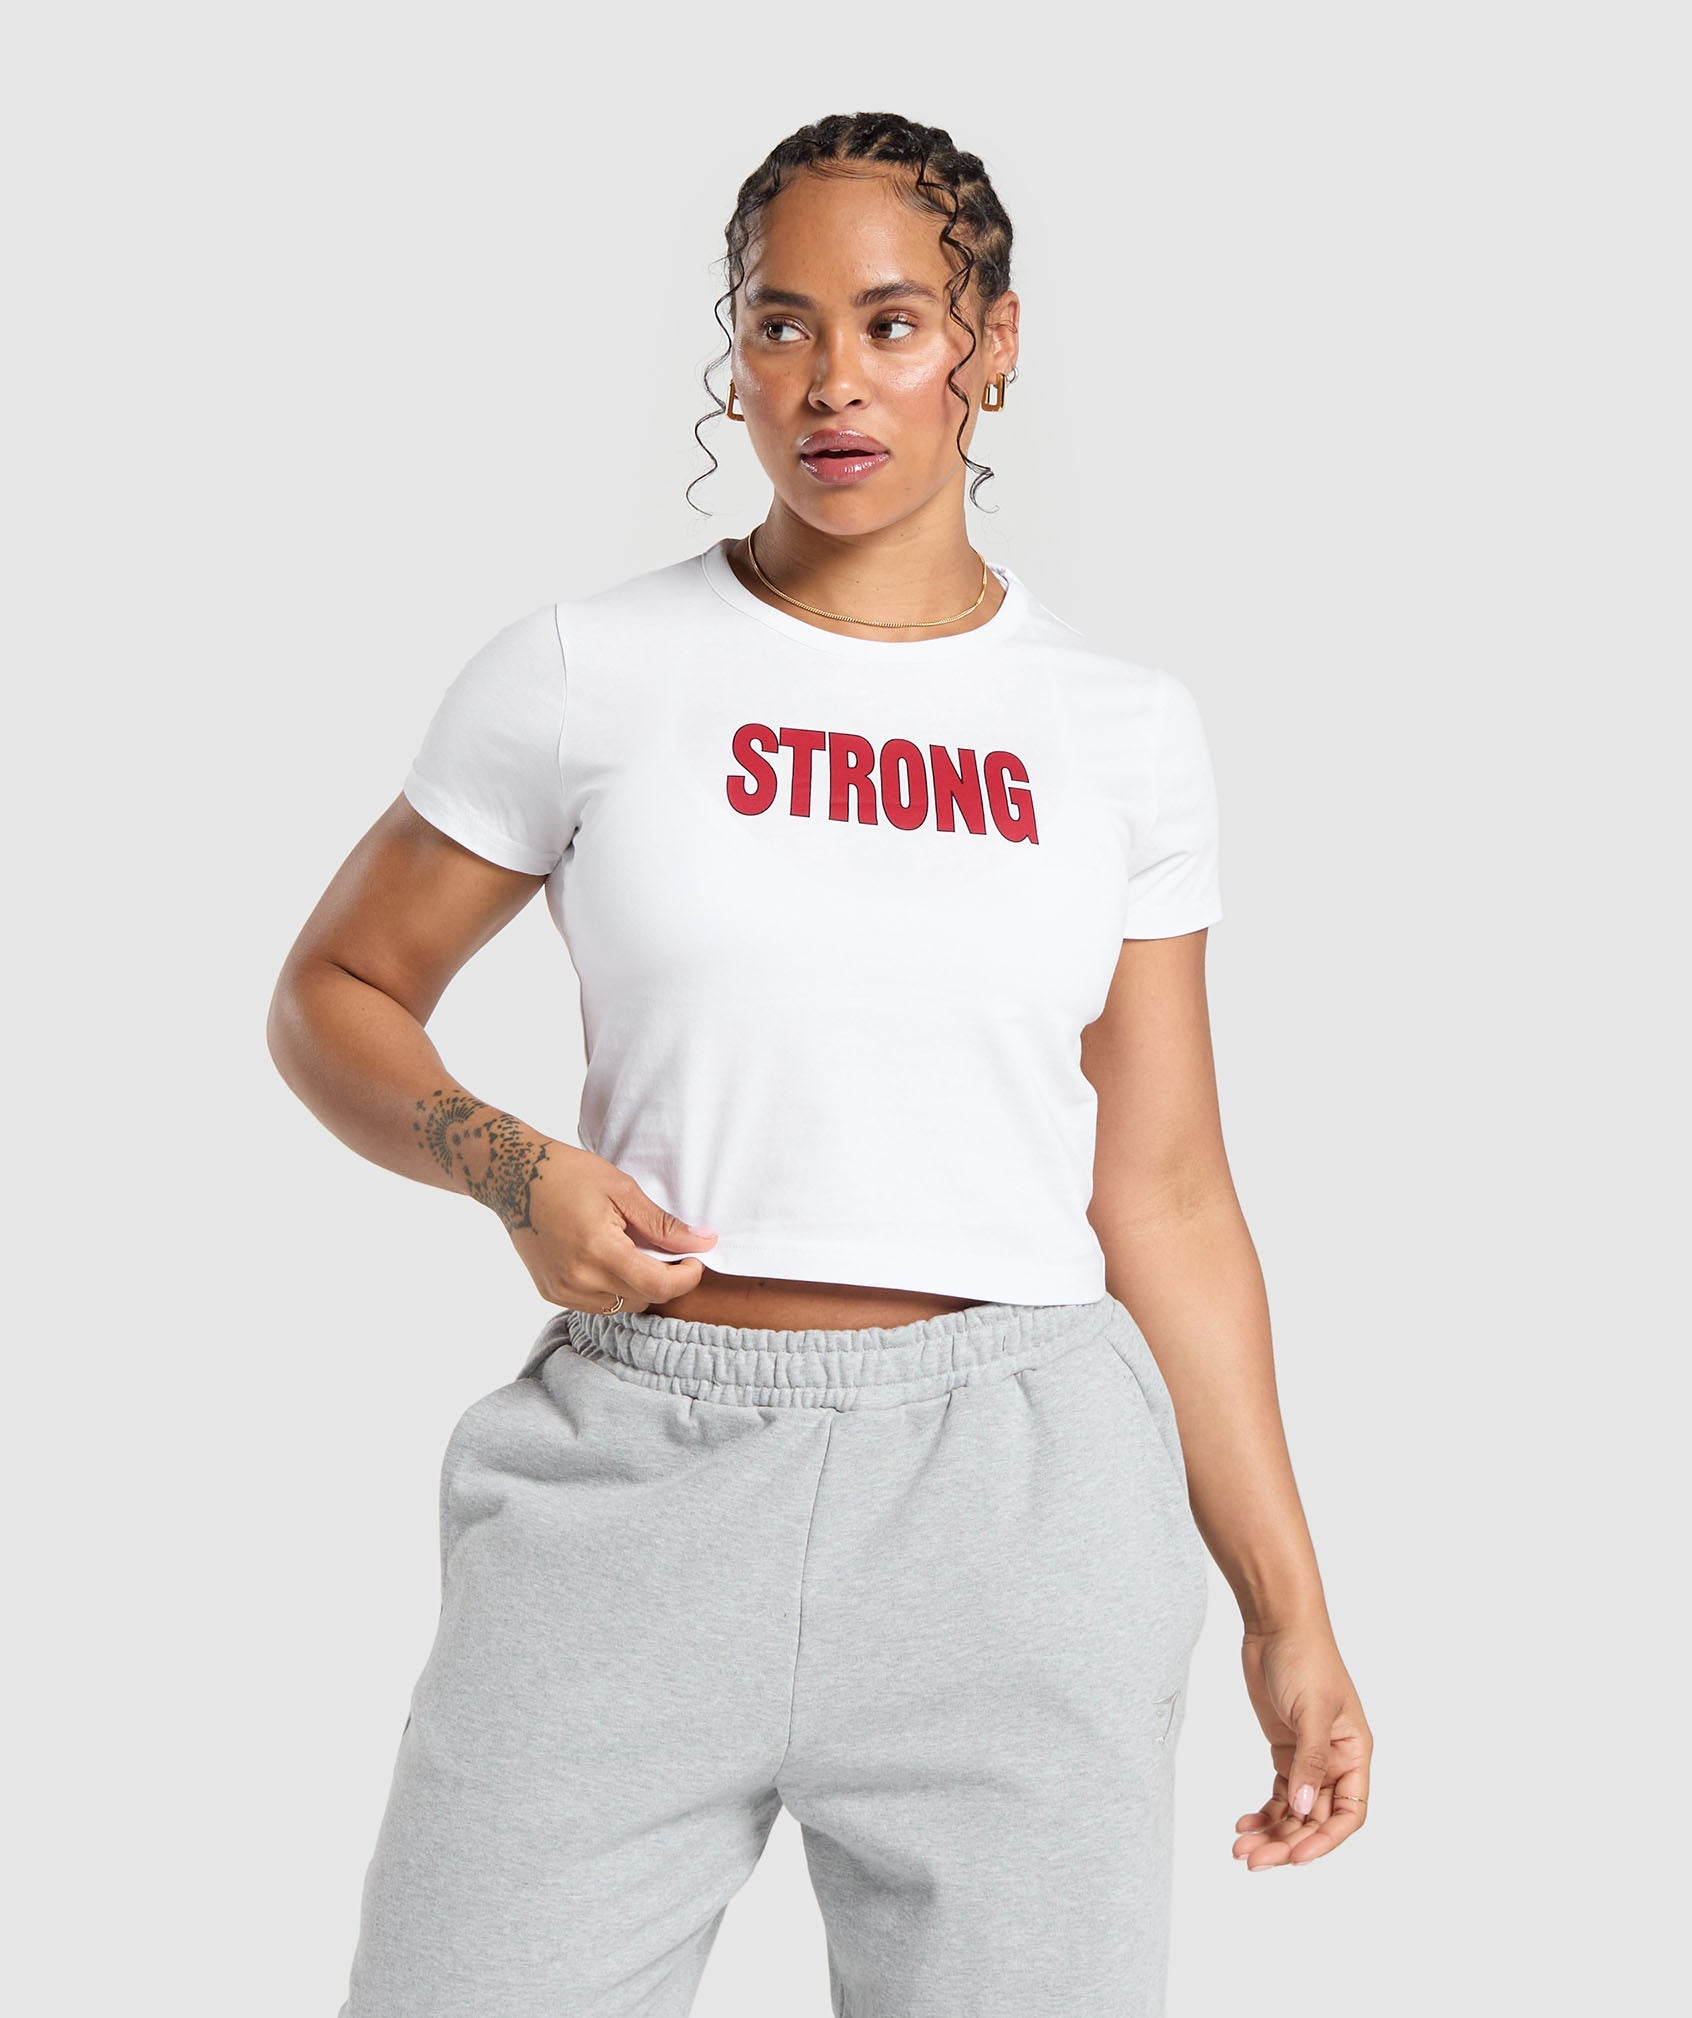 Strong Lifter Baby Tee in White - view 1